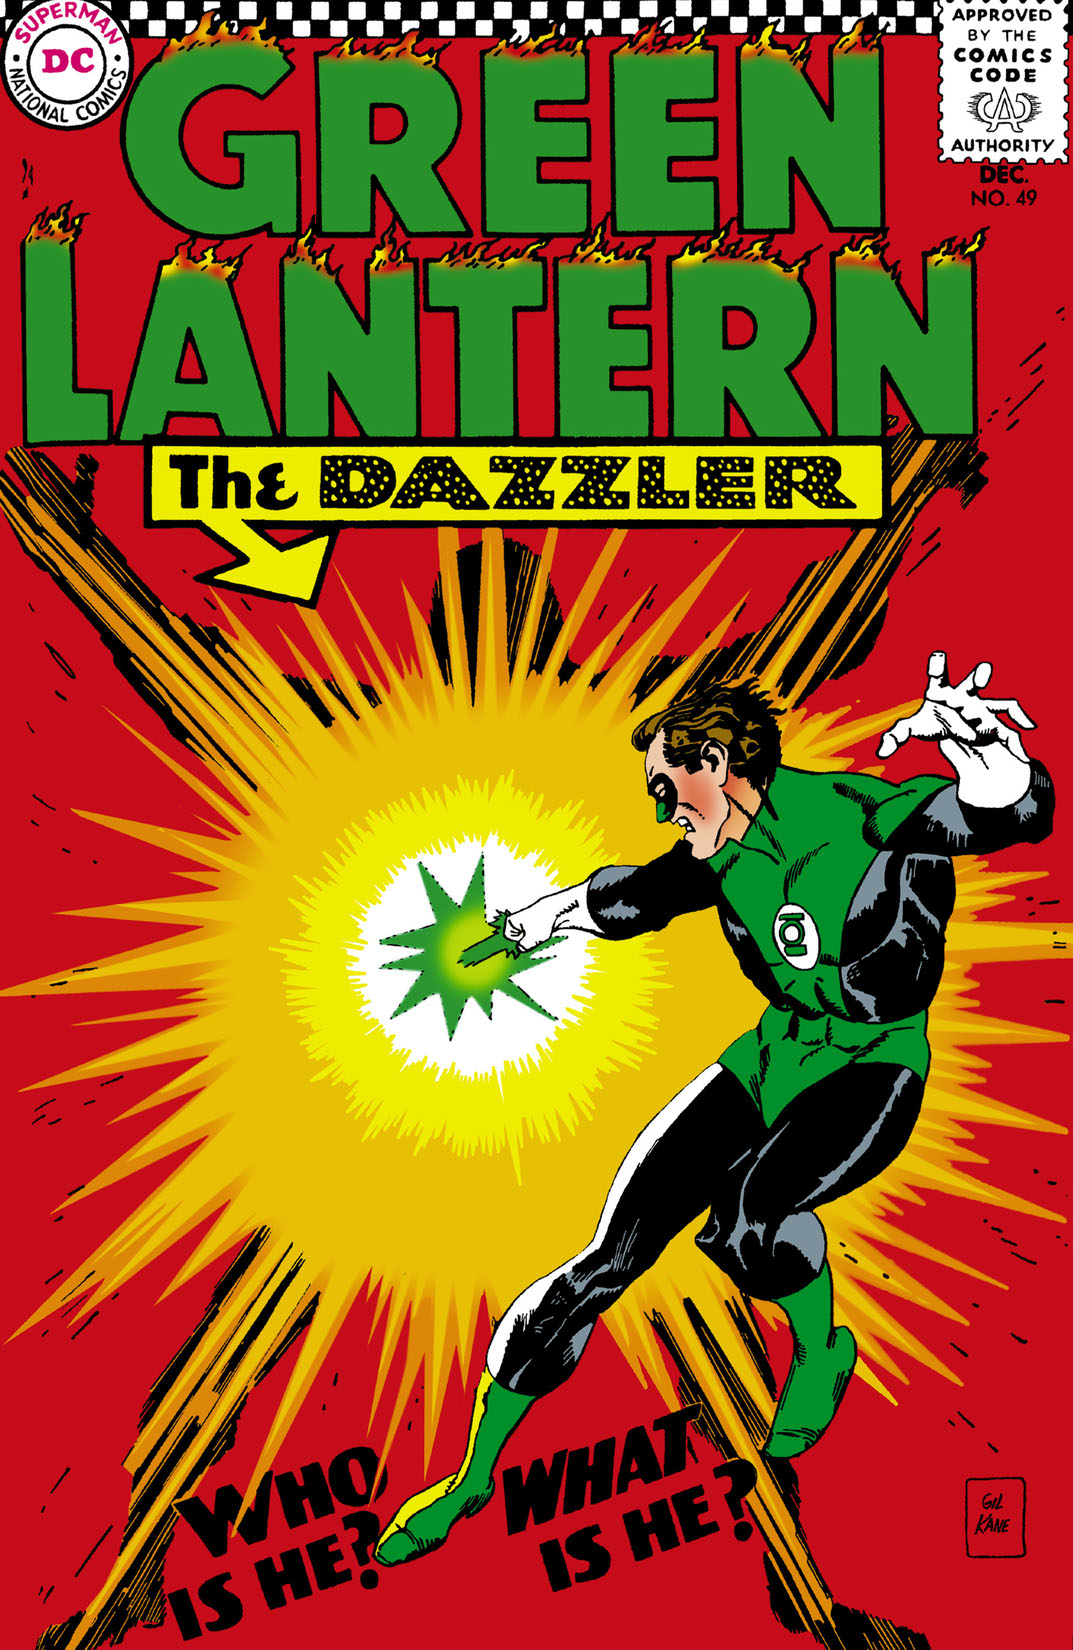 Green Lantern (1960-) #49 preview images